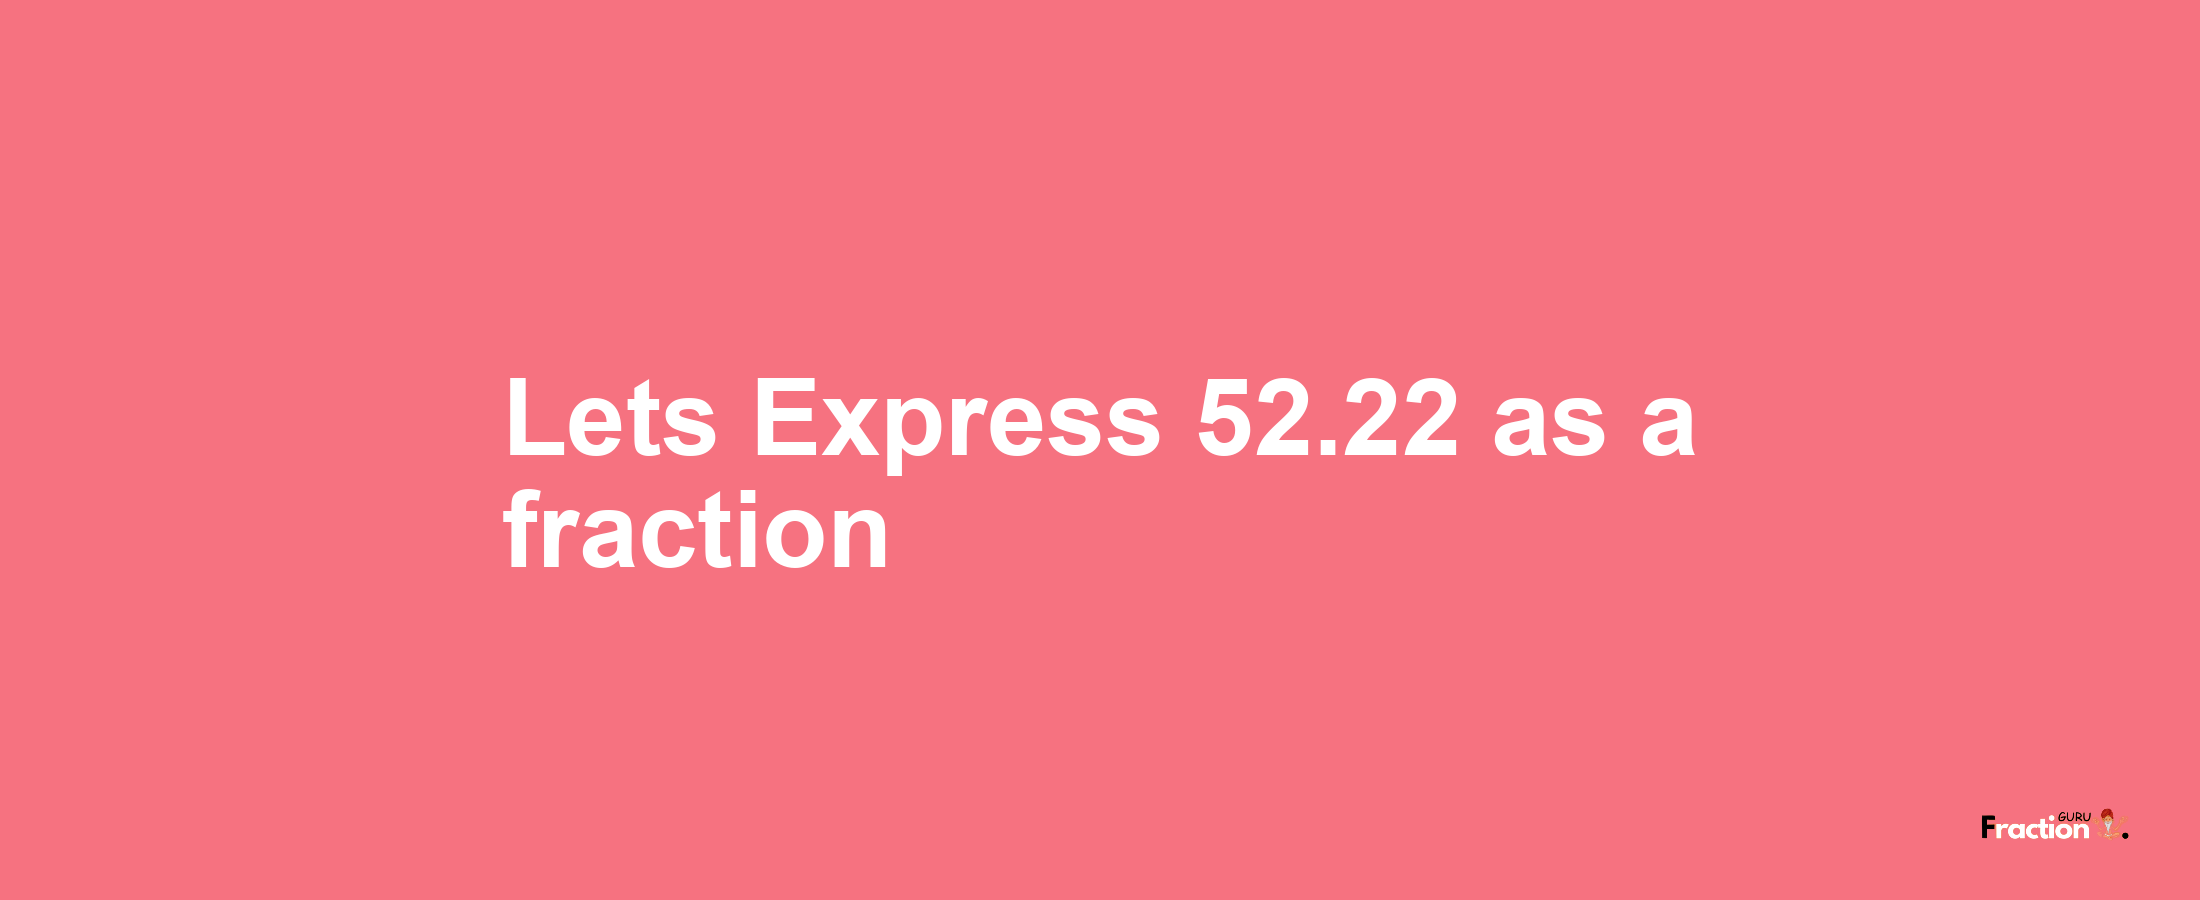 Lets Express 52.22 as afraction